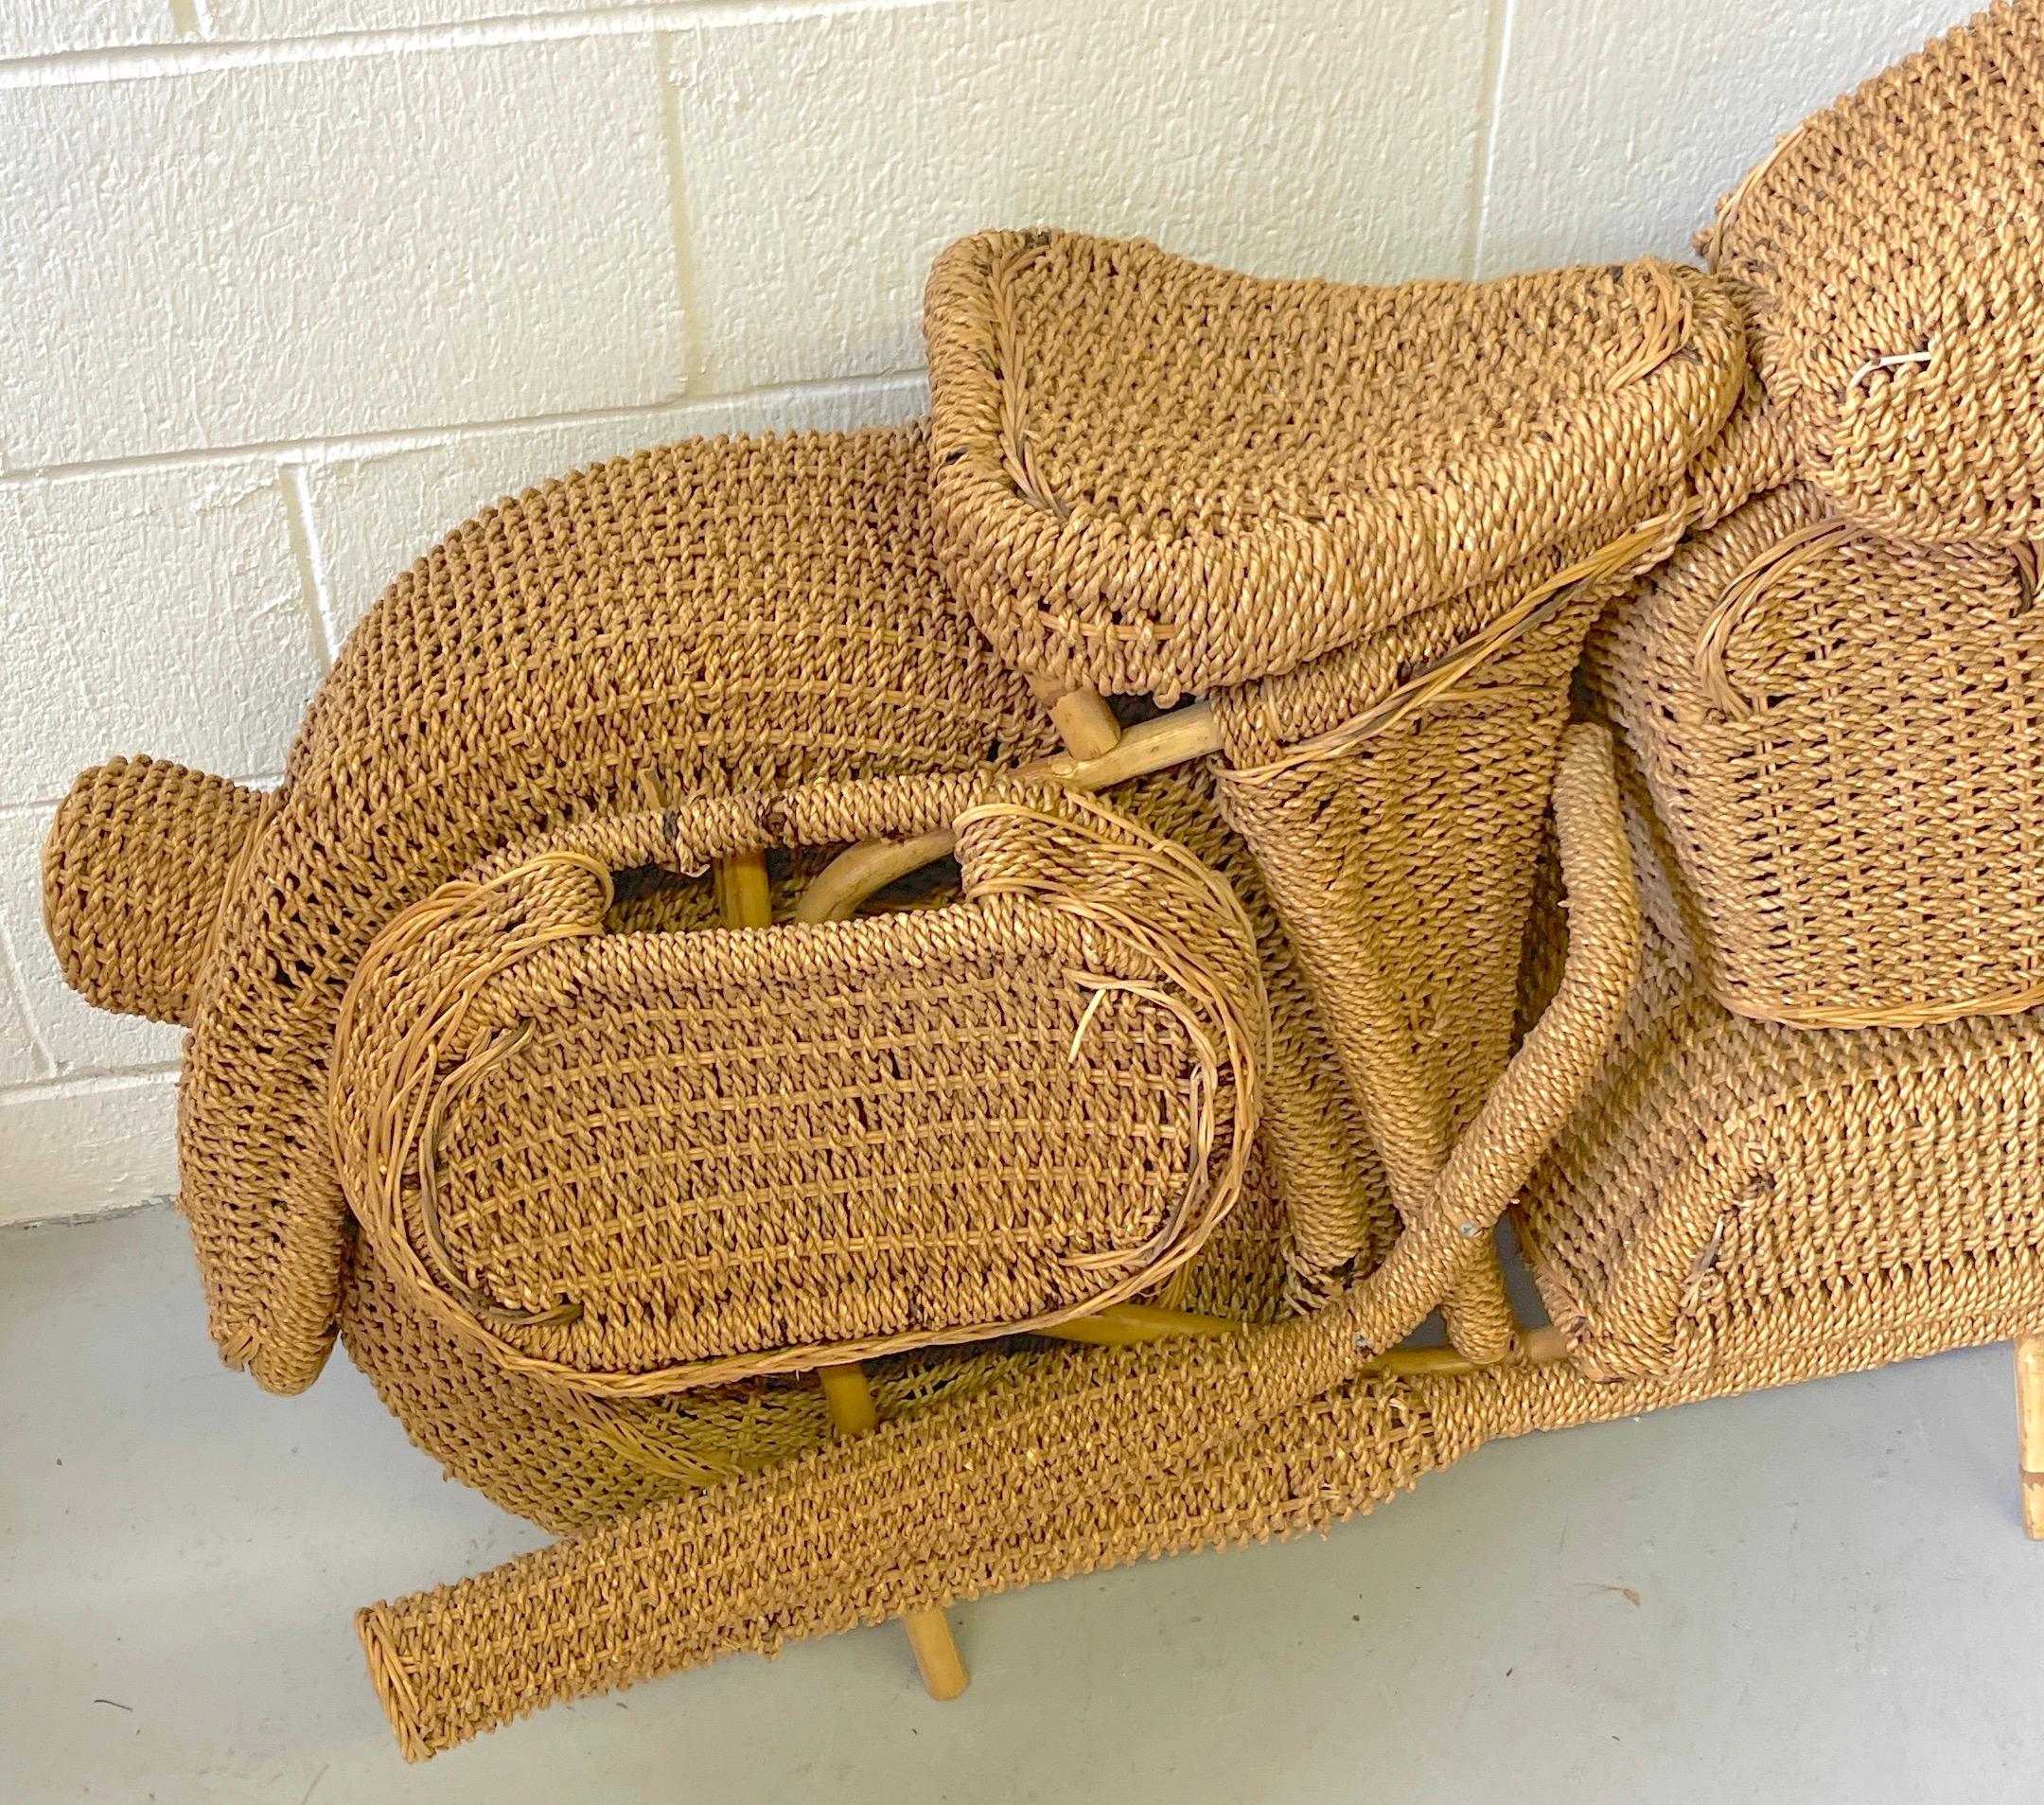 Life Size Harley Davidson Rattan Model of a Motorcycle, Attributed to Tom Dixon For Sale 5